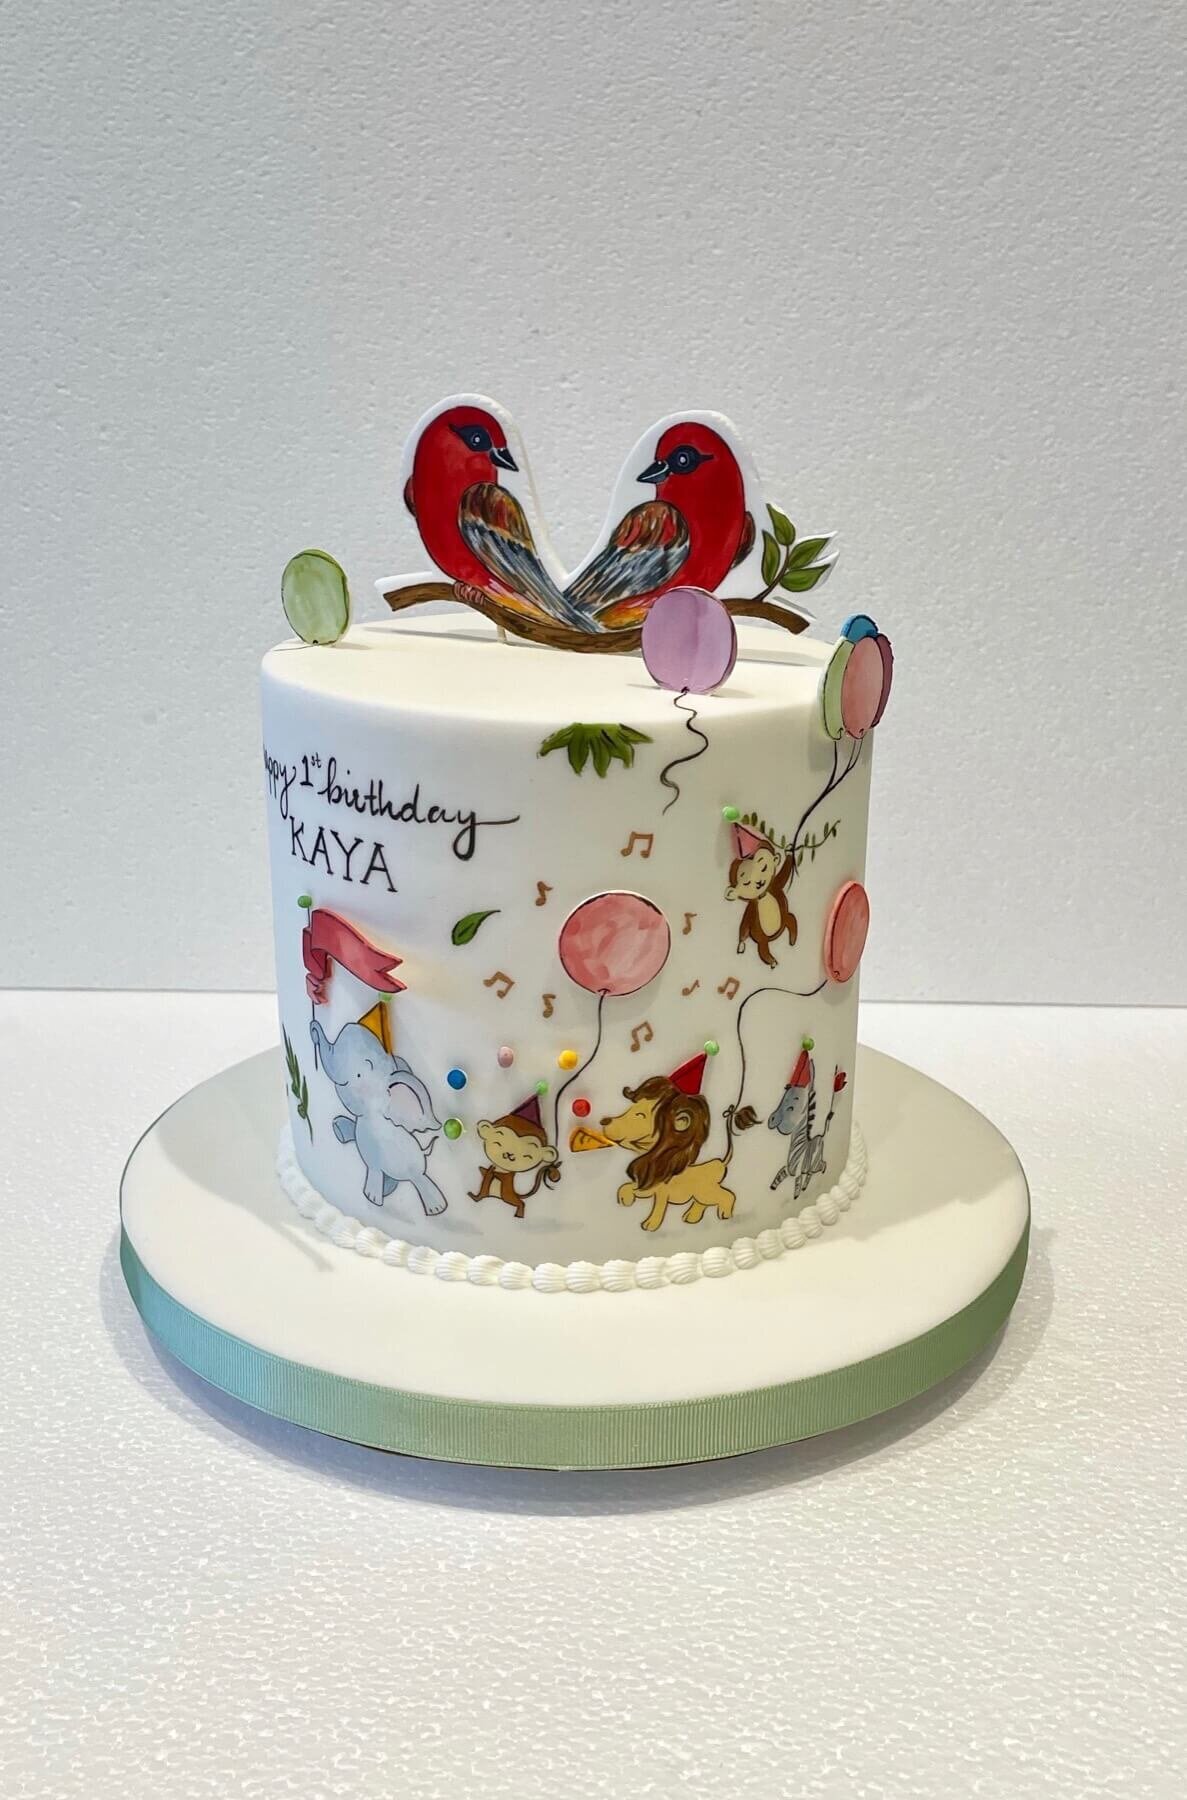 A hand painted birthday cake with animals and balloons